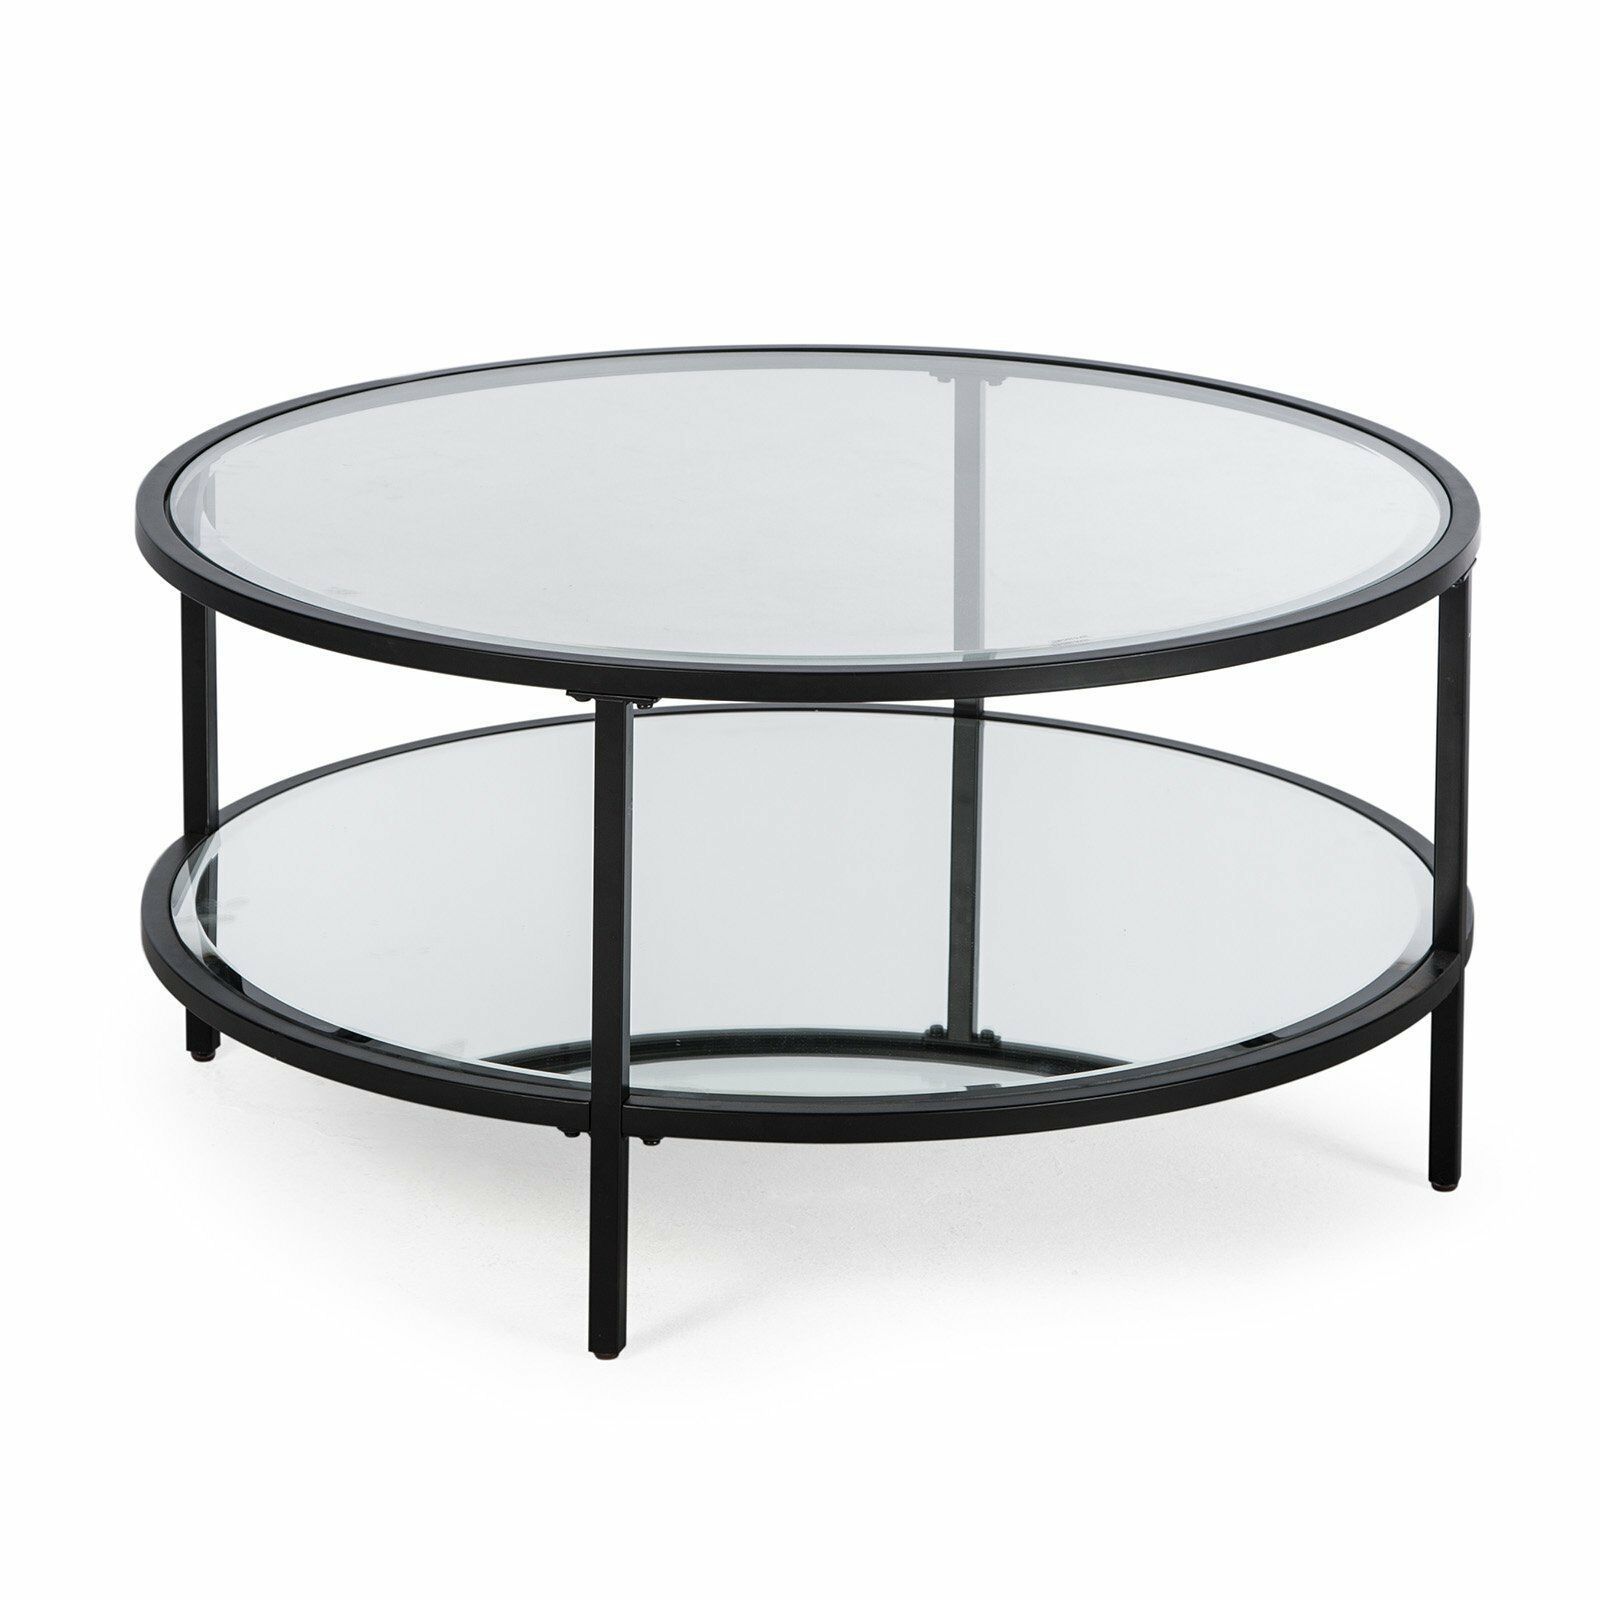 Contemporary Glam Metal Glass Modern Round Black Coffee Table W/ Shelf Inside Full Black Round Coffee Tables (View 16 of 20)